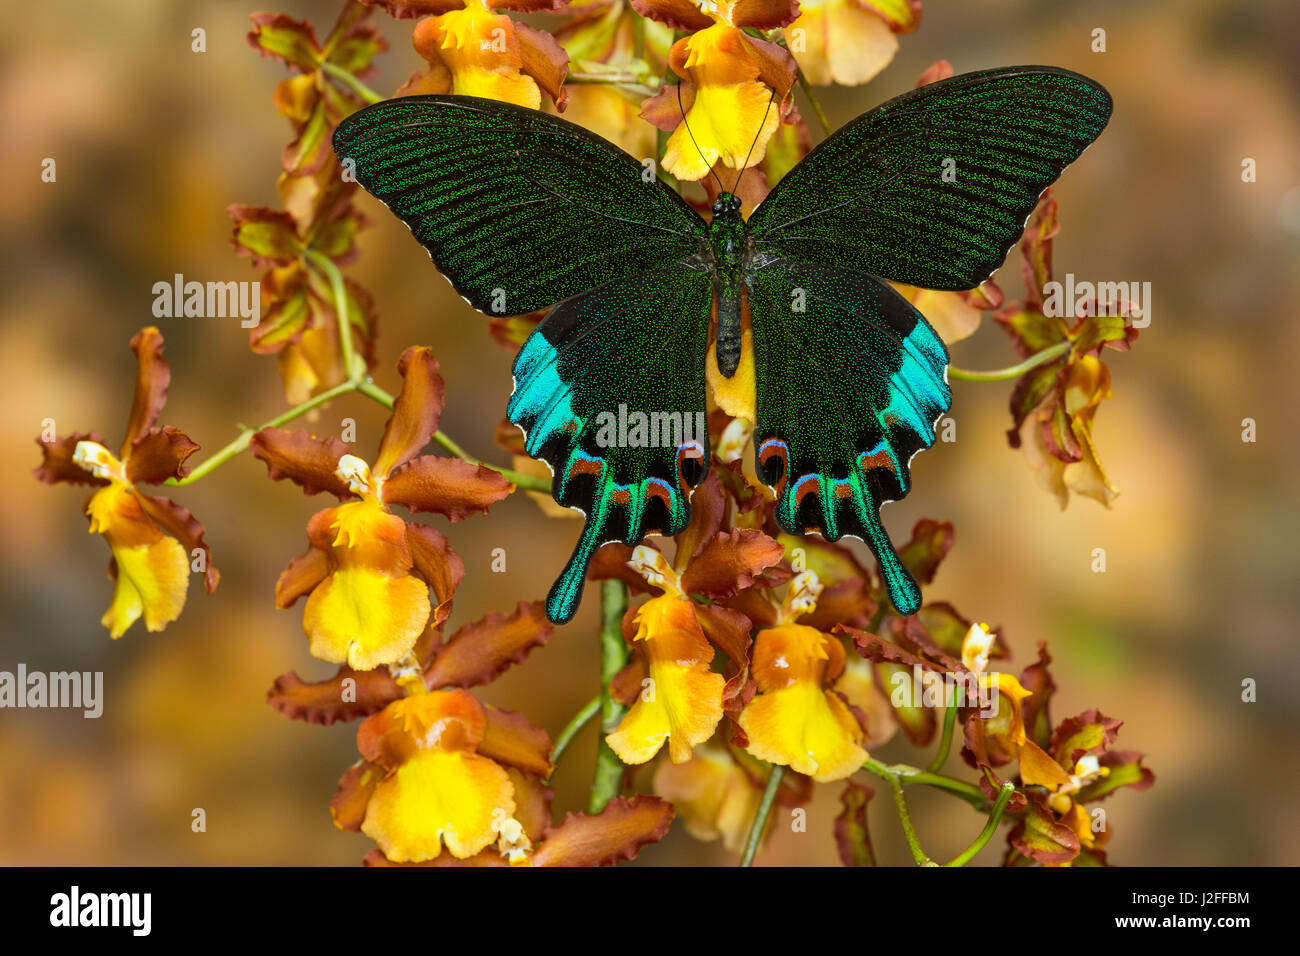 Luzon Peacock Swallowtail Butterfly from Philippines, Papilio hermeli Stock Photo